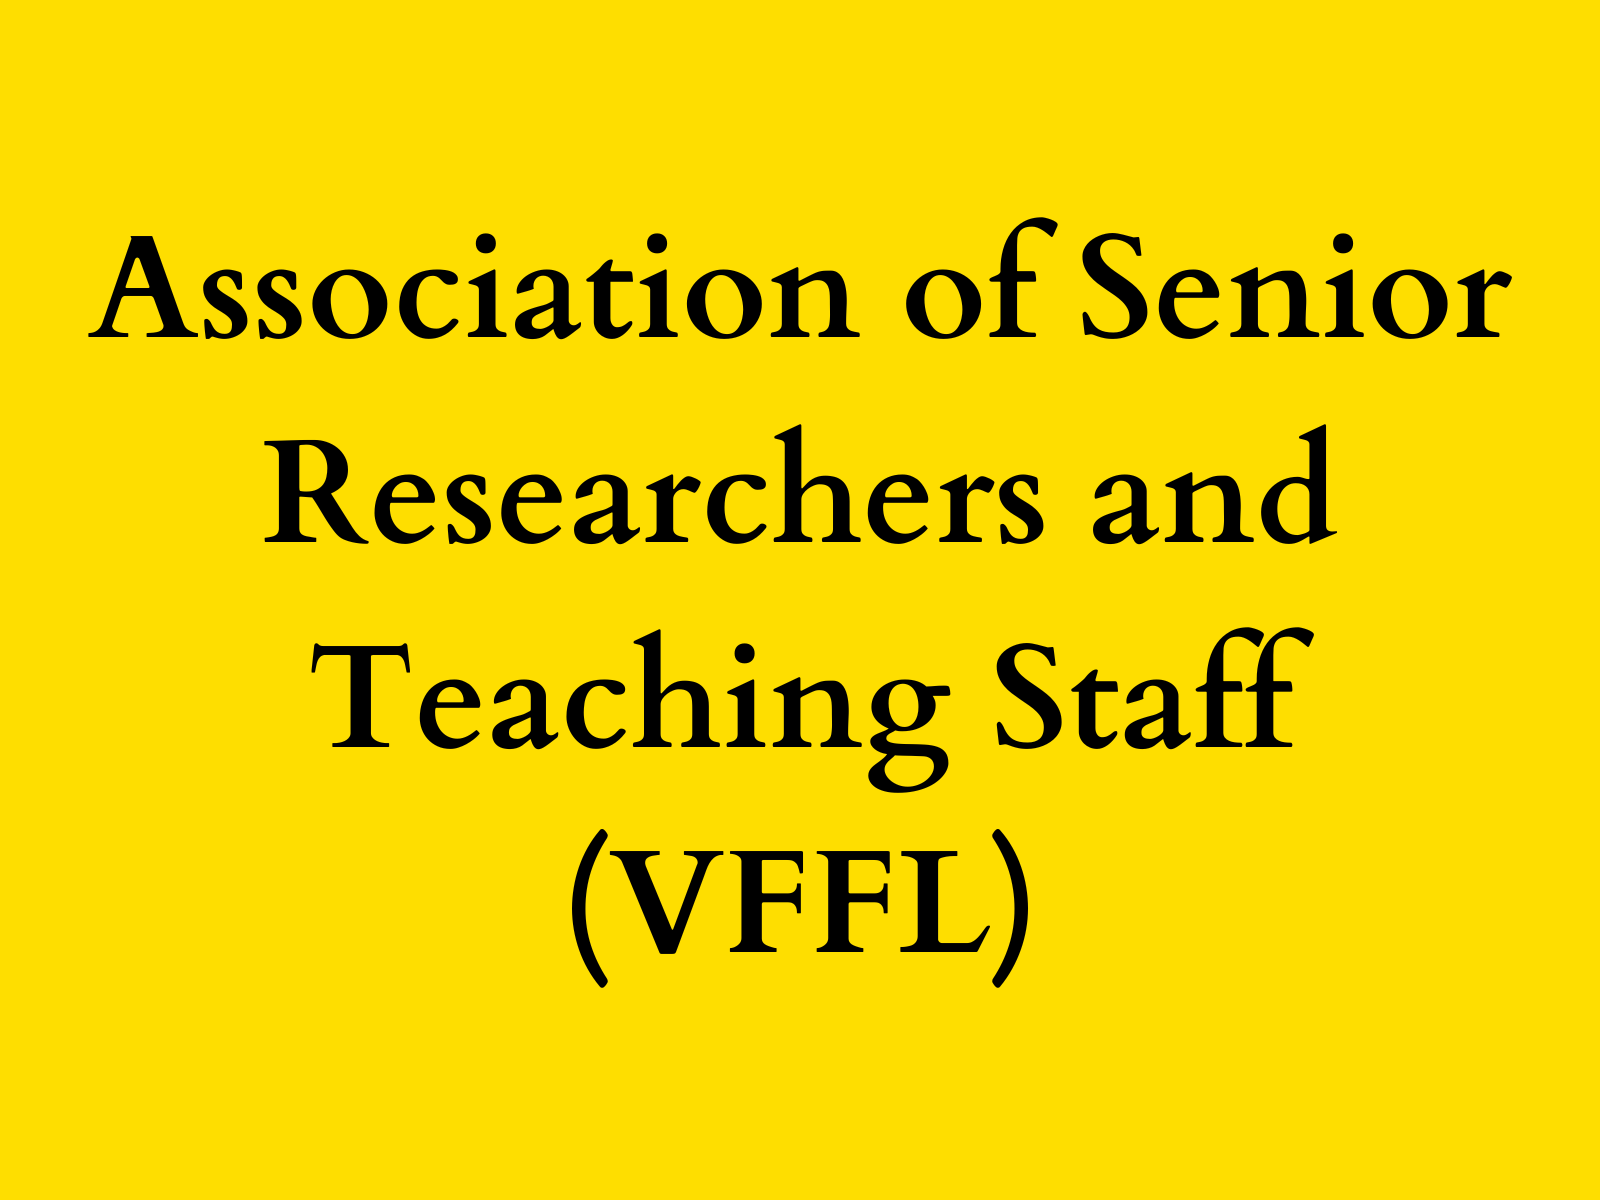 Association of Senior Researchers and Teching Staff (VFFL)